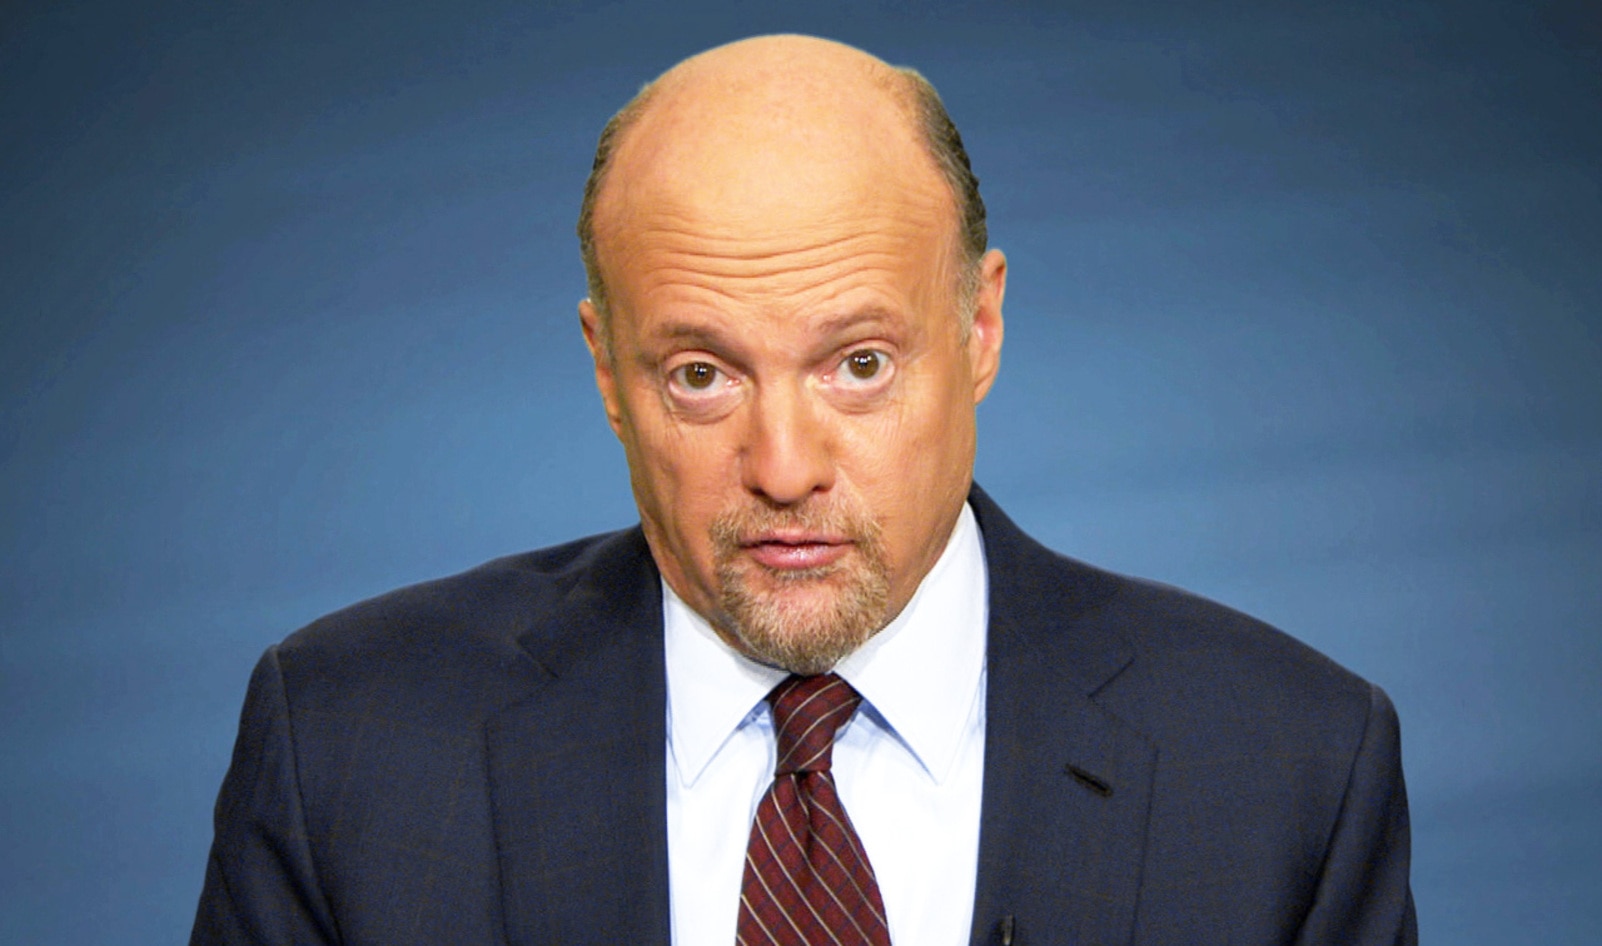 Wall Street Analyst Jim Cramer: Pandemic Revealed That “We’re Going Plant-Based”